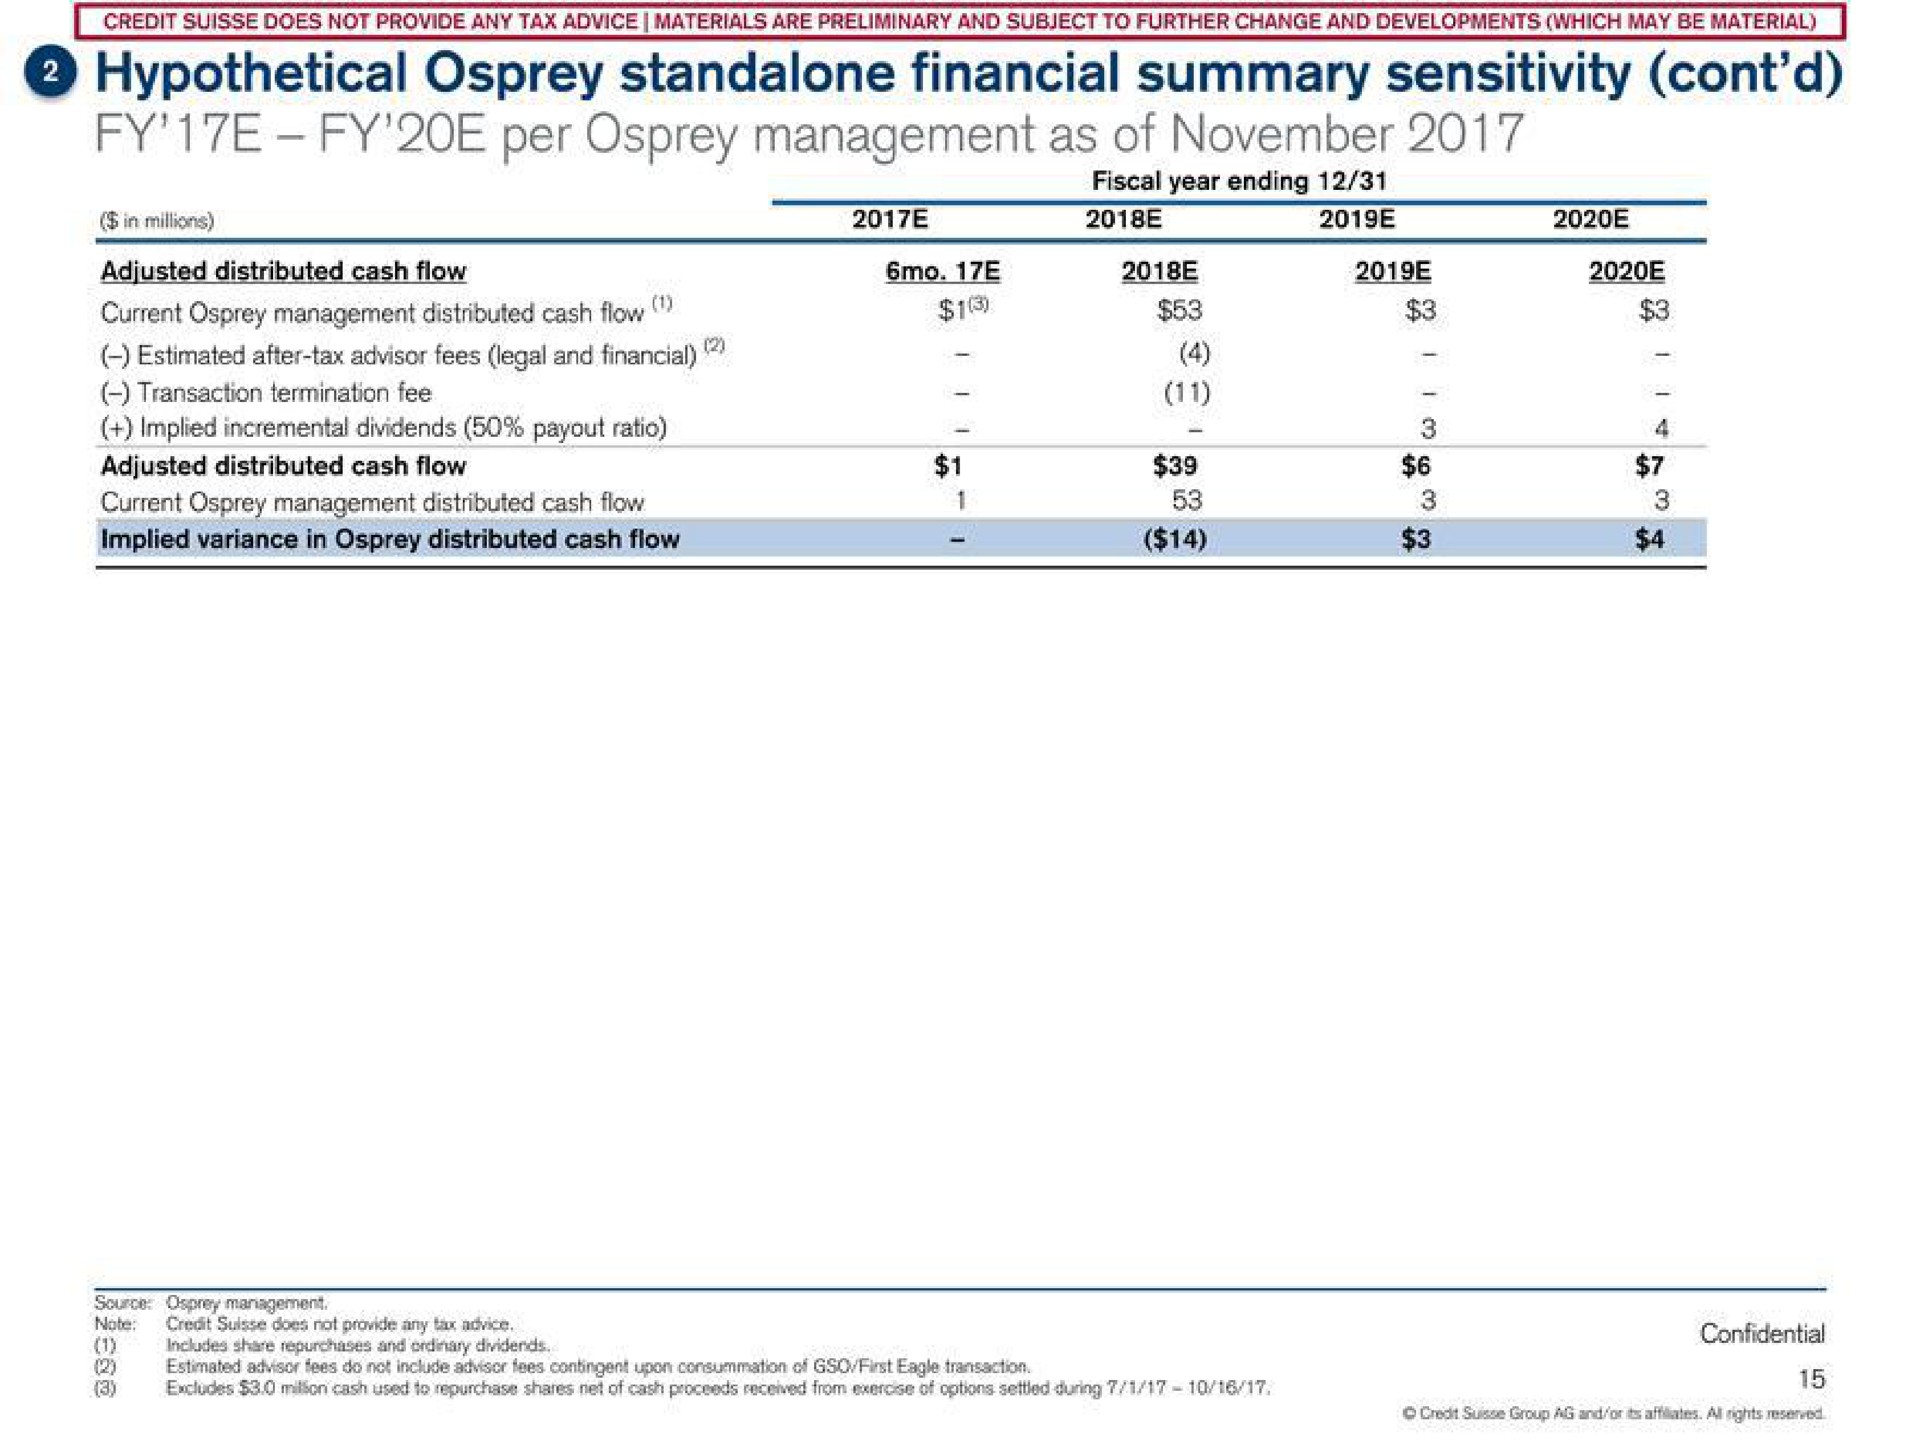 hypothetical osprey financial summary sensitivity per osprey management as of | Credit Suisse